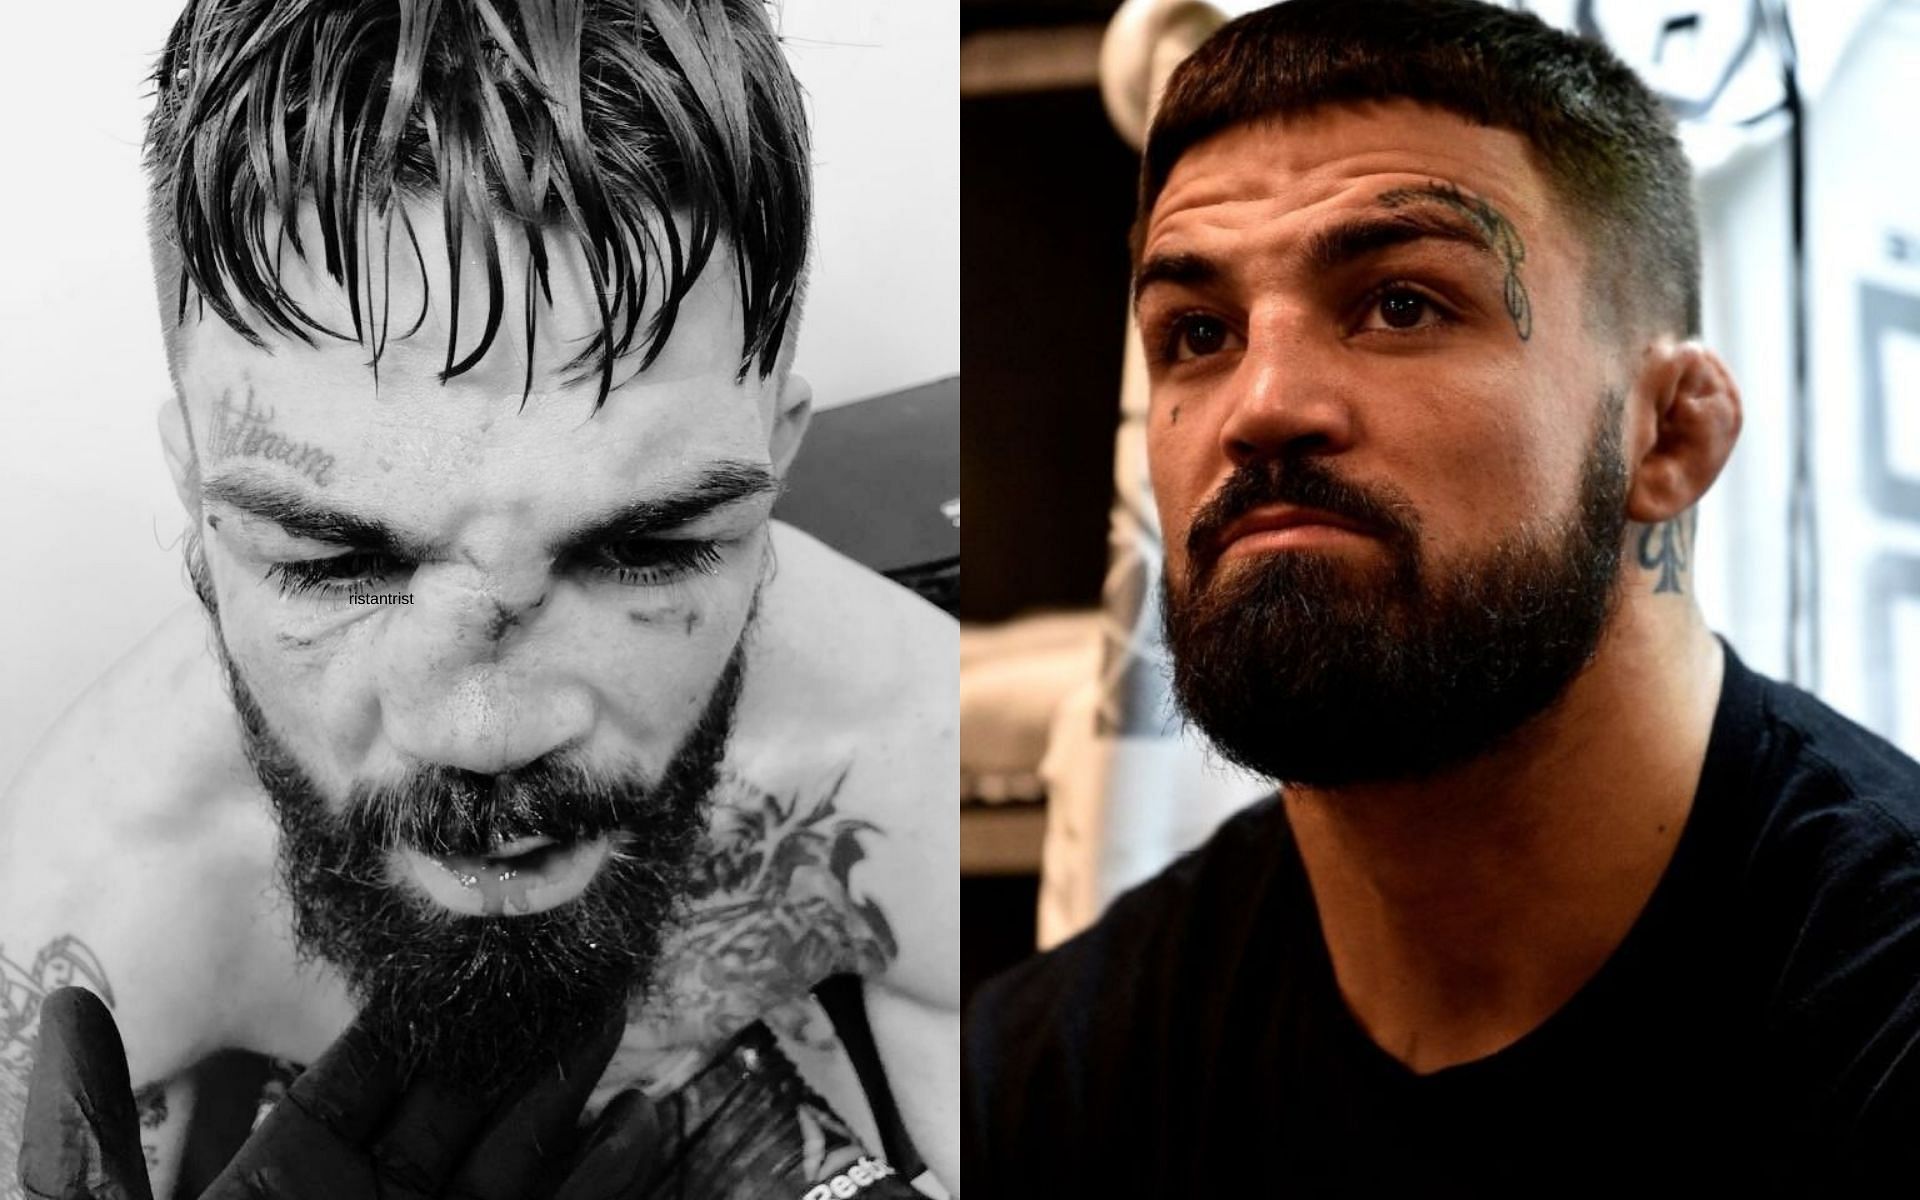 Mike Perry nose injury: How did Mike Perry break his nose? The horrific ...